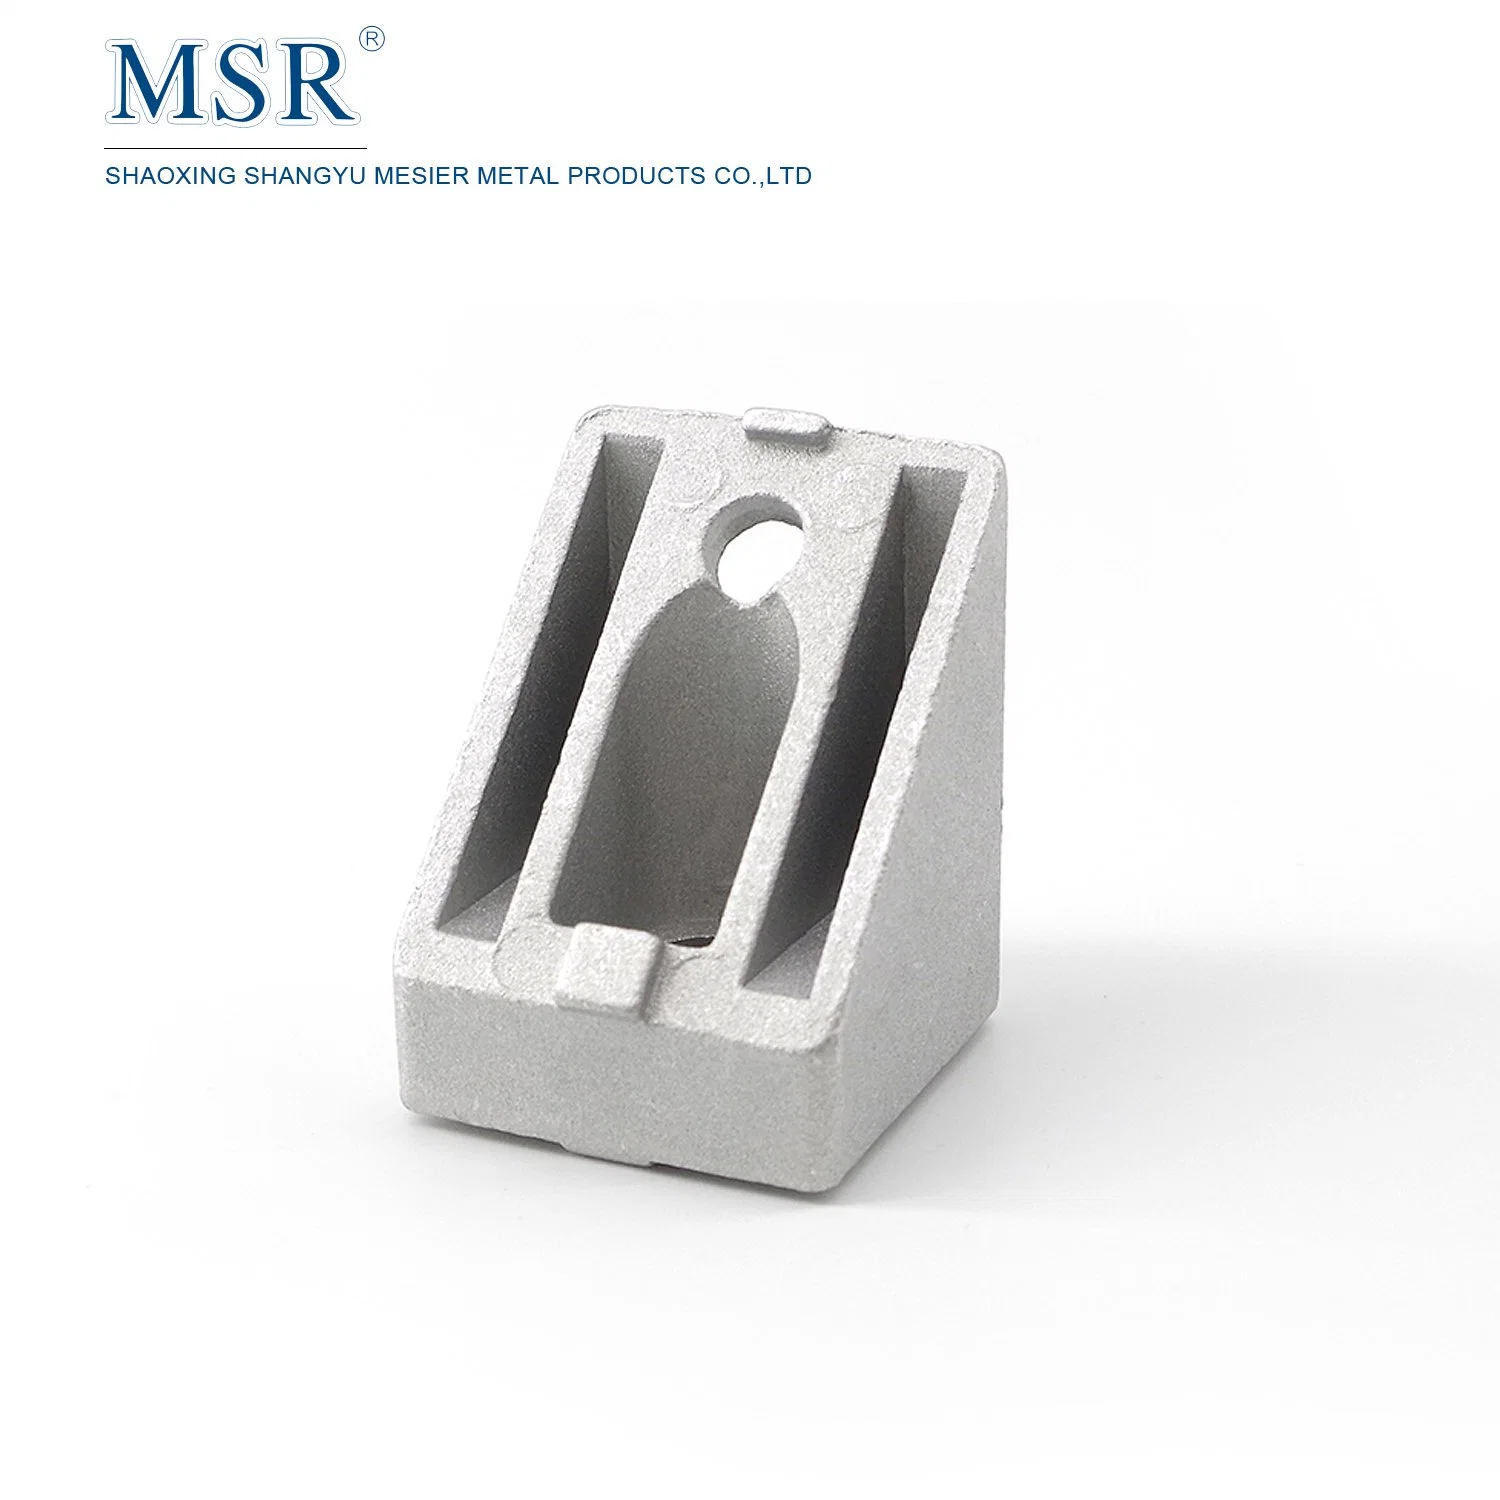 China Manufacturer Die Casting Aluminum 45 Degree Support Hardware for 40 Series Aluminum Profile Connecting of Powder Coating